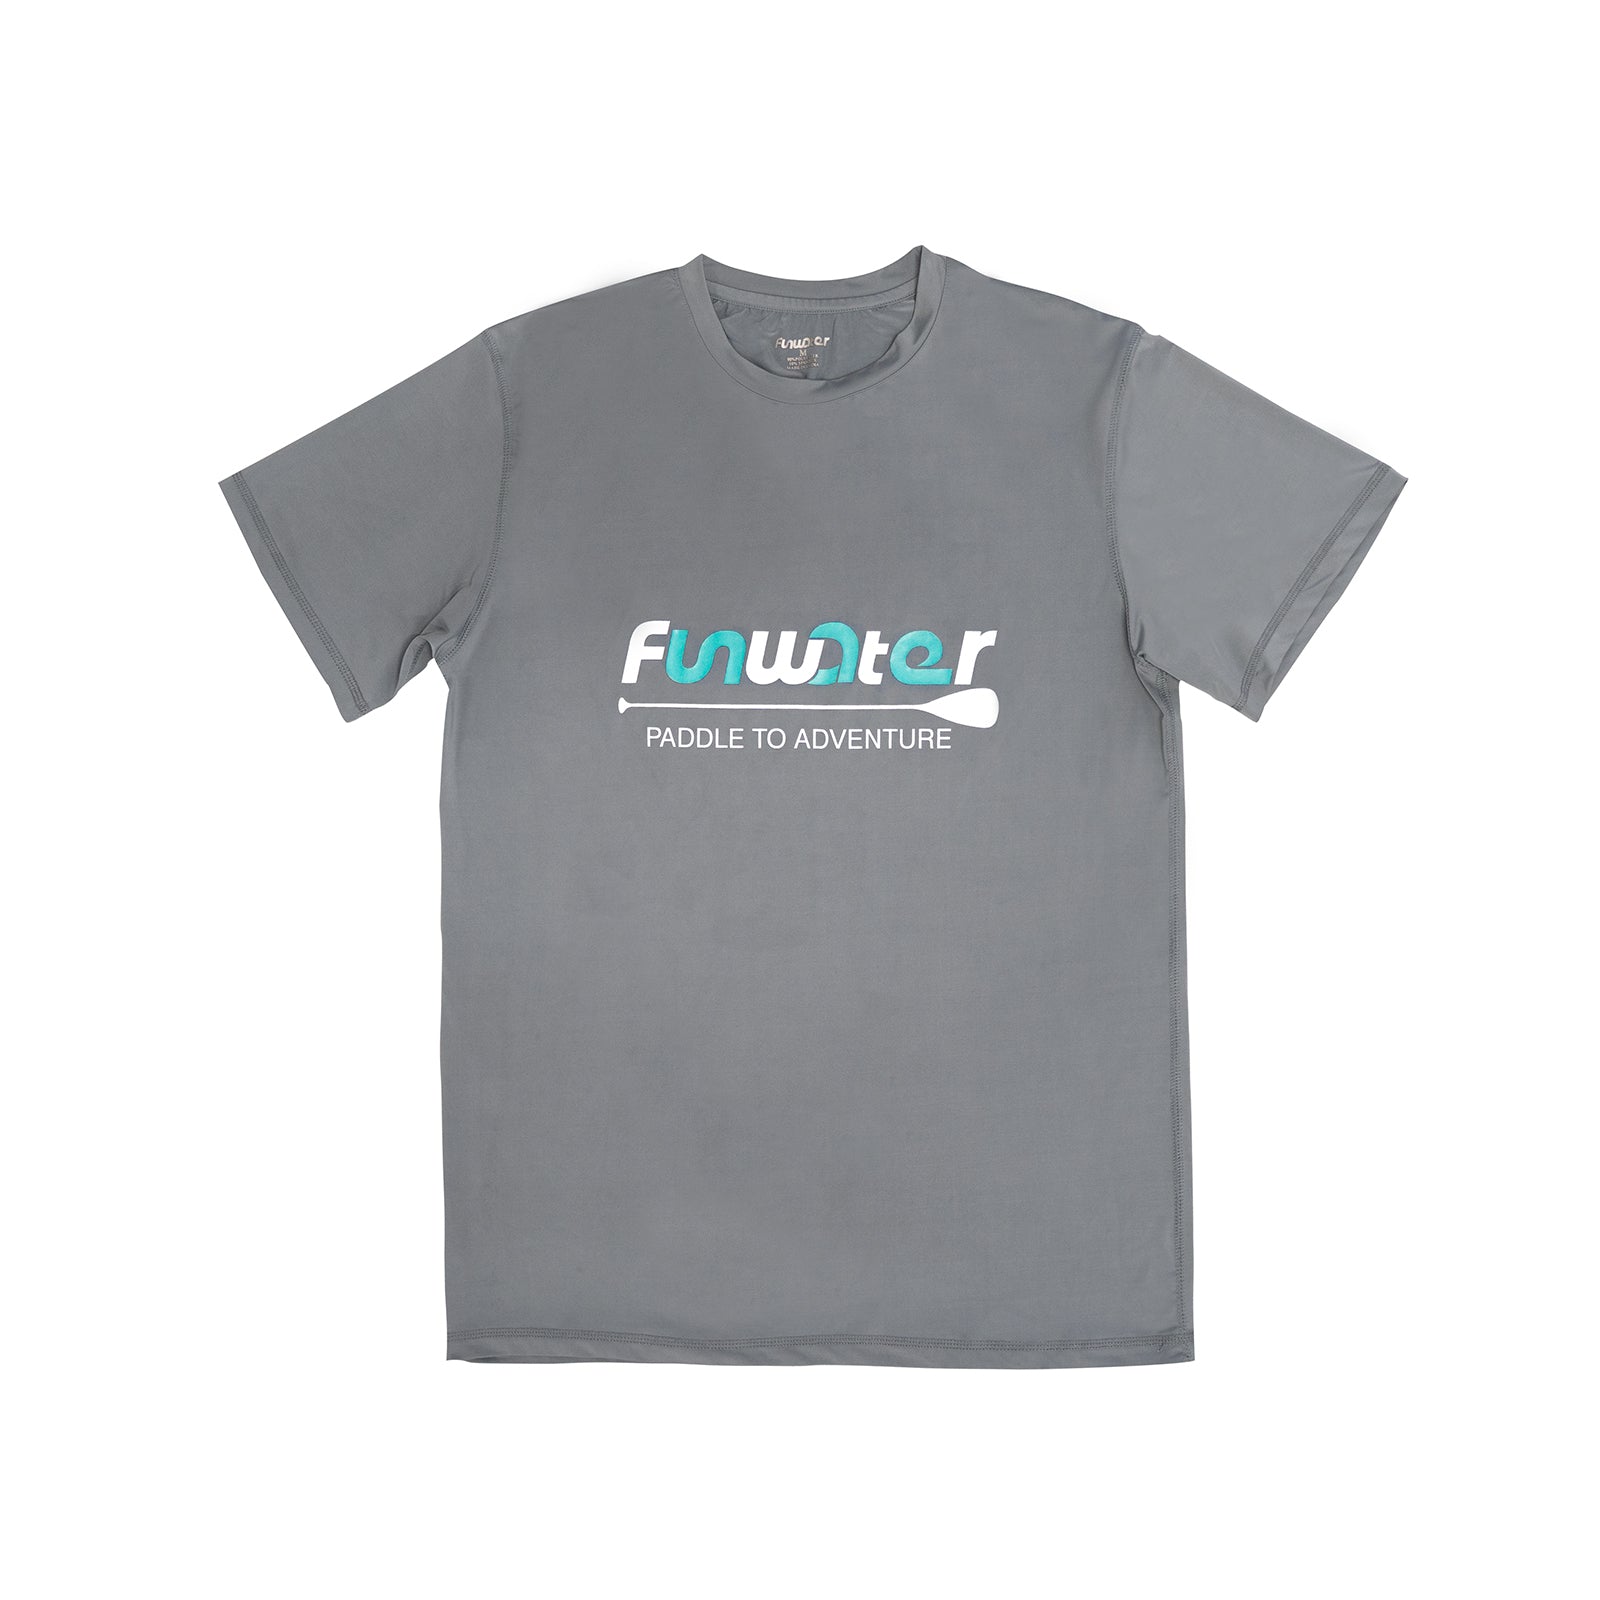 funwater stand up paddle board outdoor leisure sports soft dark gray round neck T-shirt